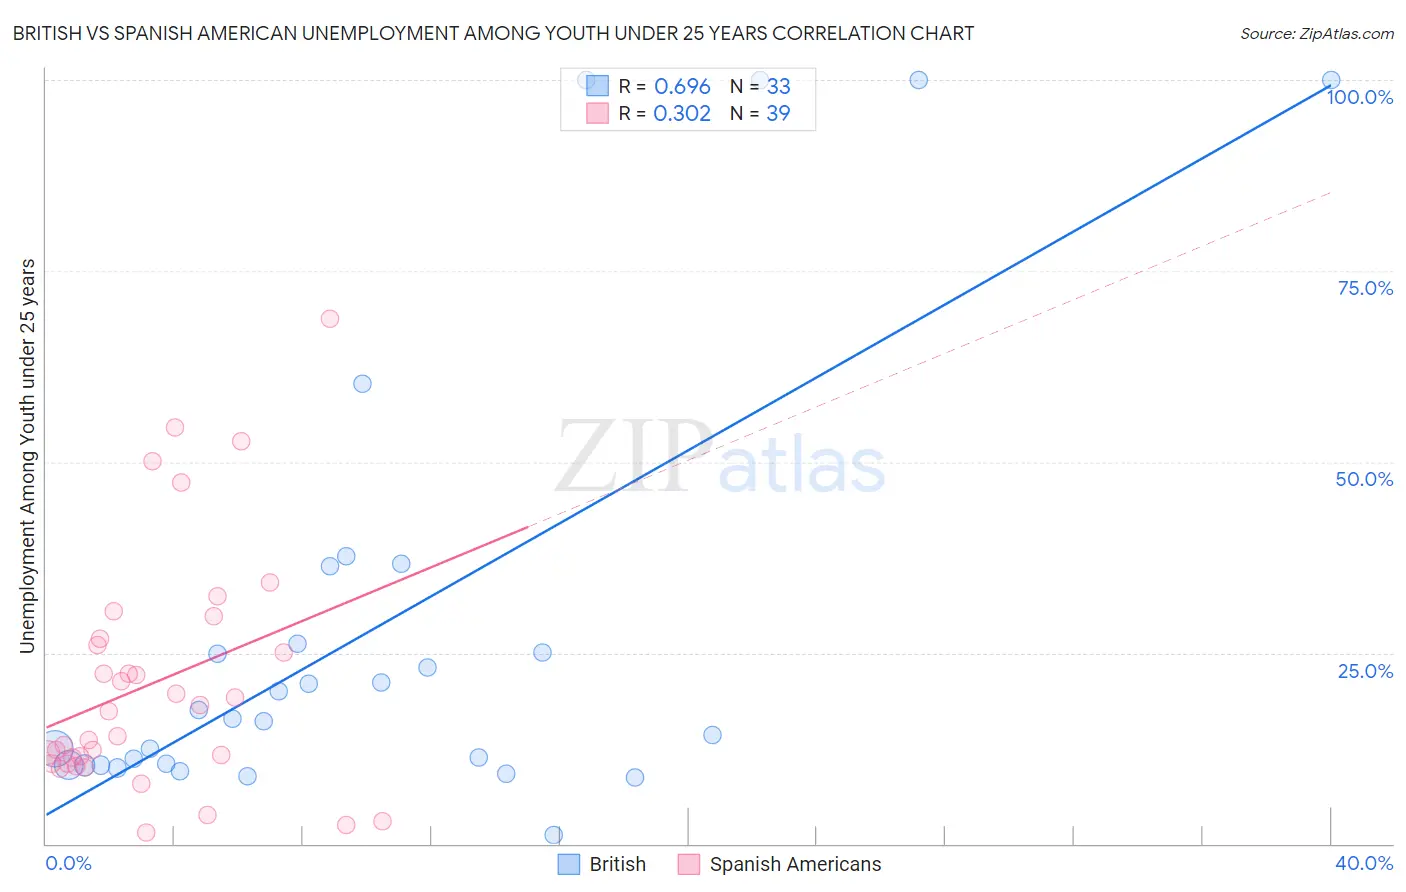 British vs Spanish American Unemployment Among Youth under 25 years